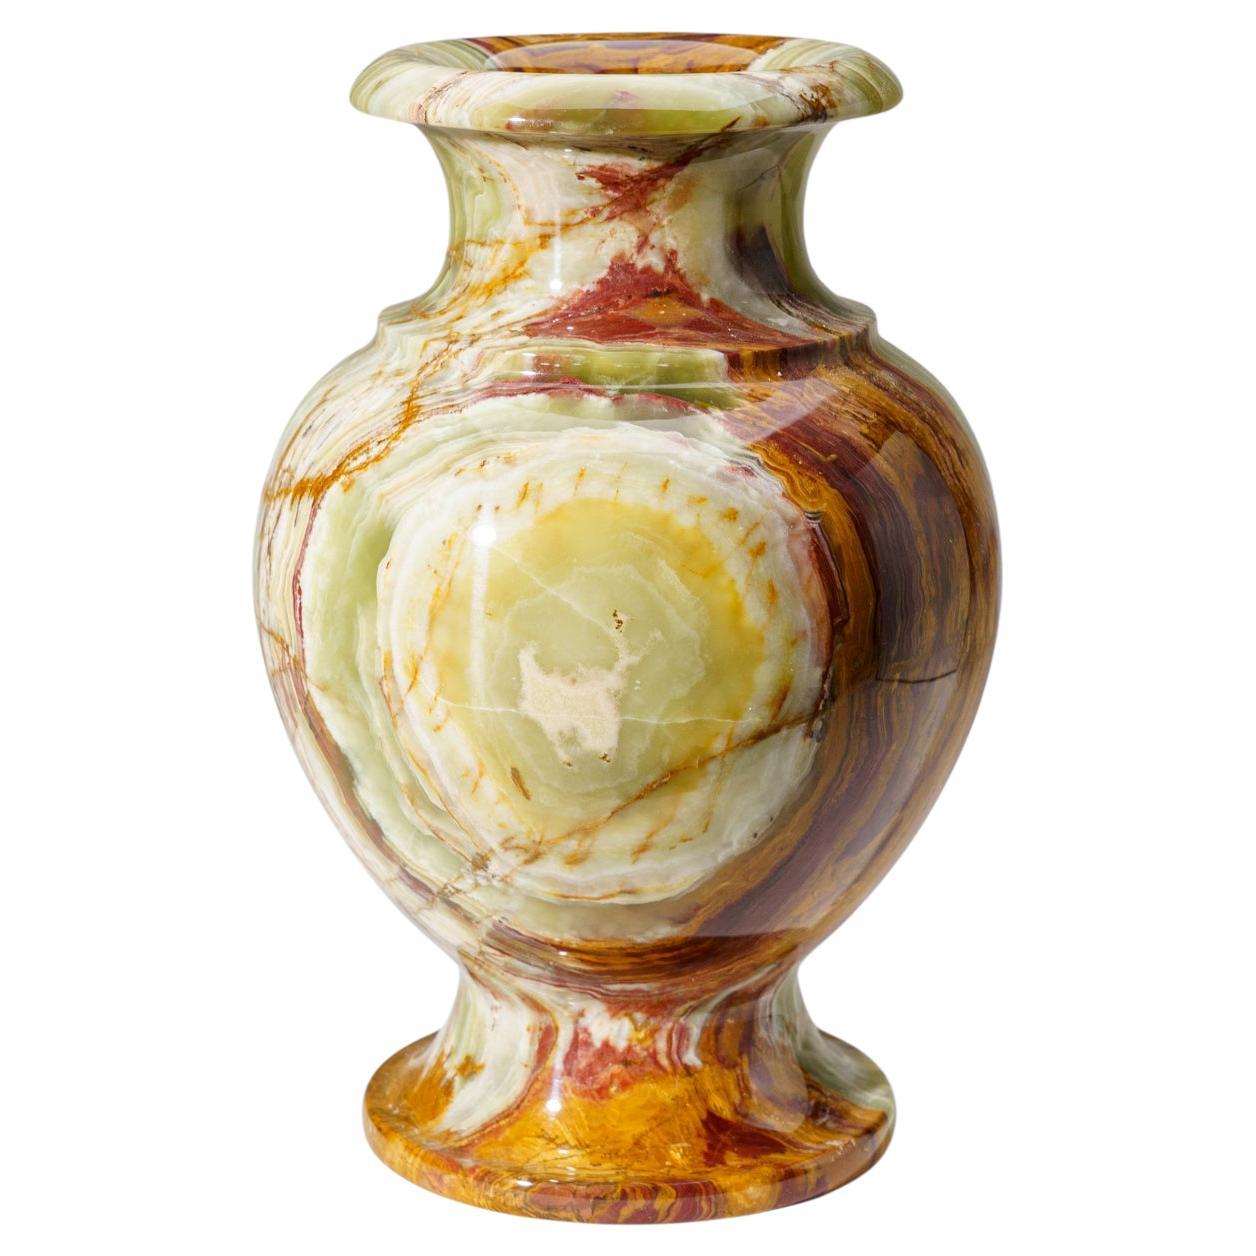 Genuine Polished Onyx Flower Vase from Mexico (18 lbs) For Sale